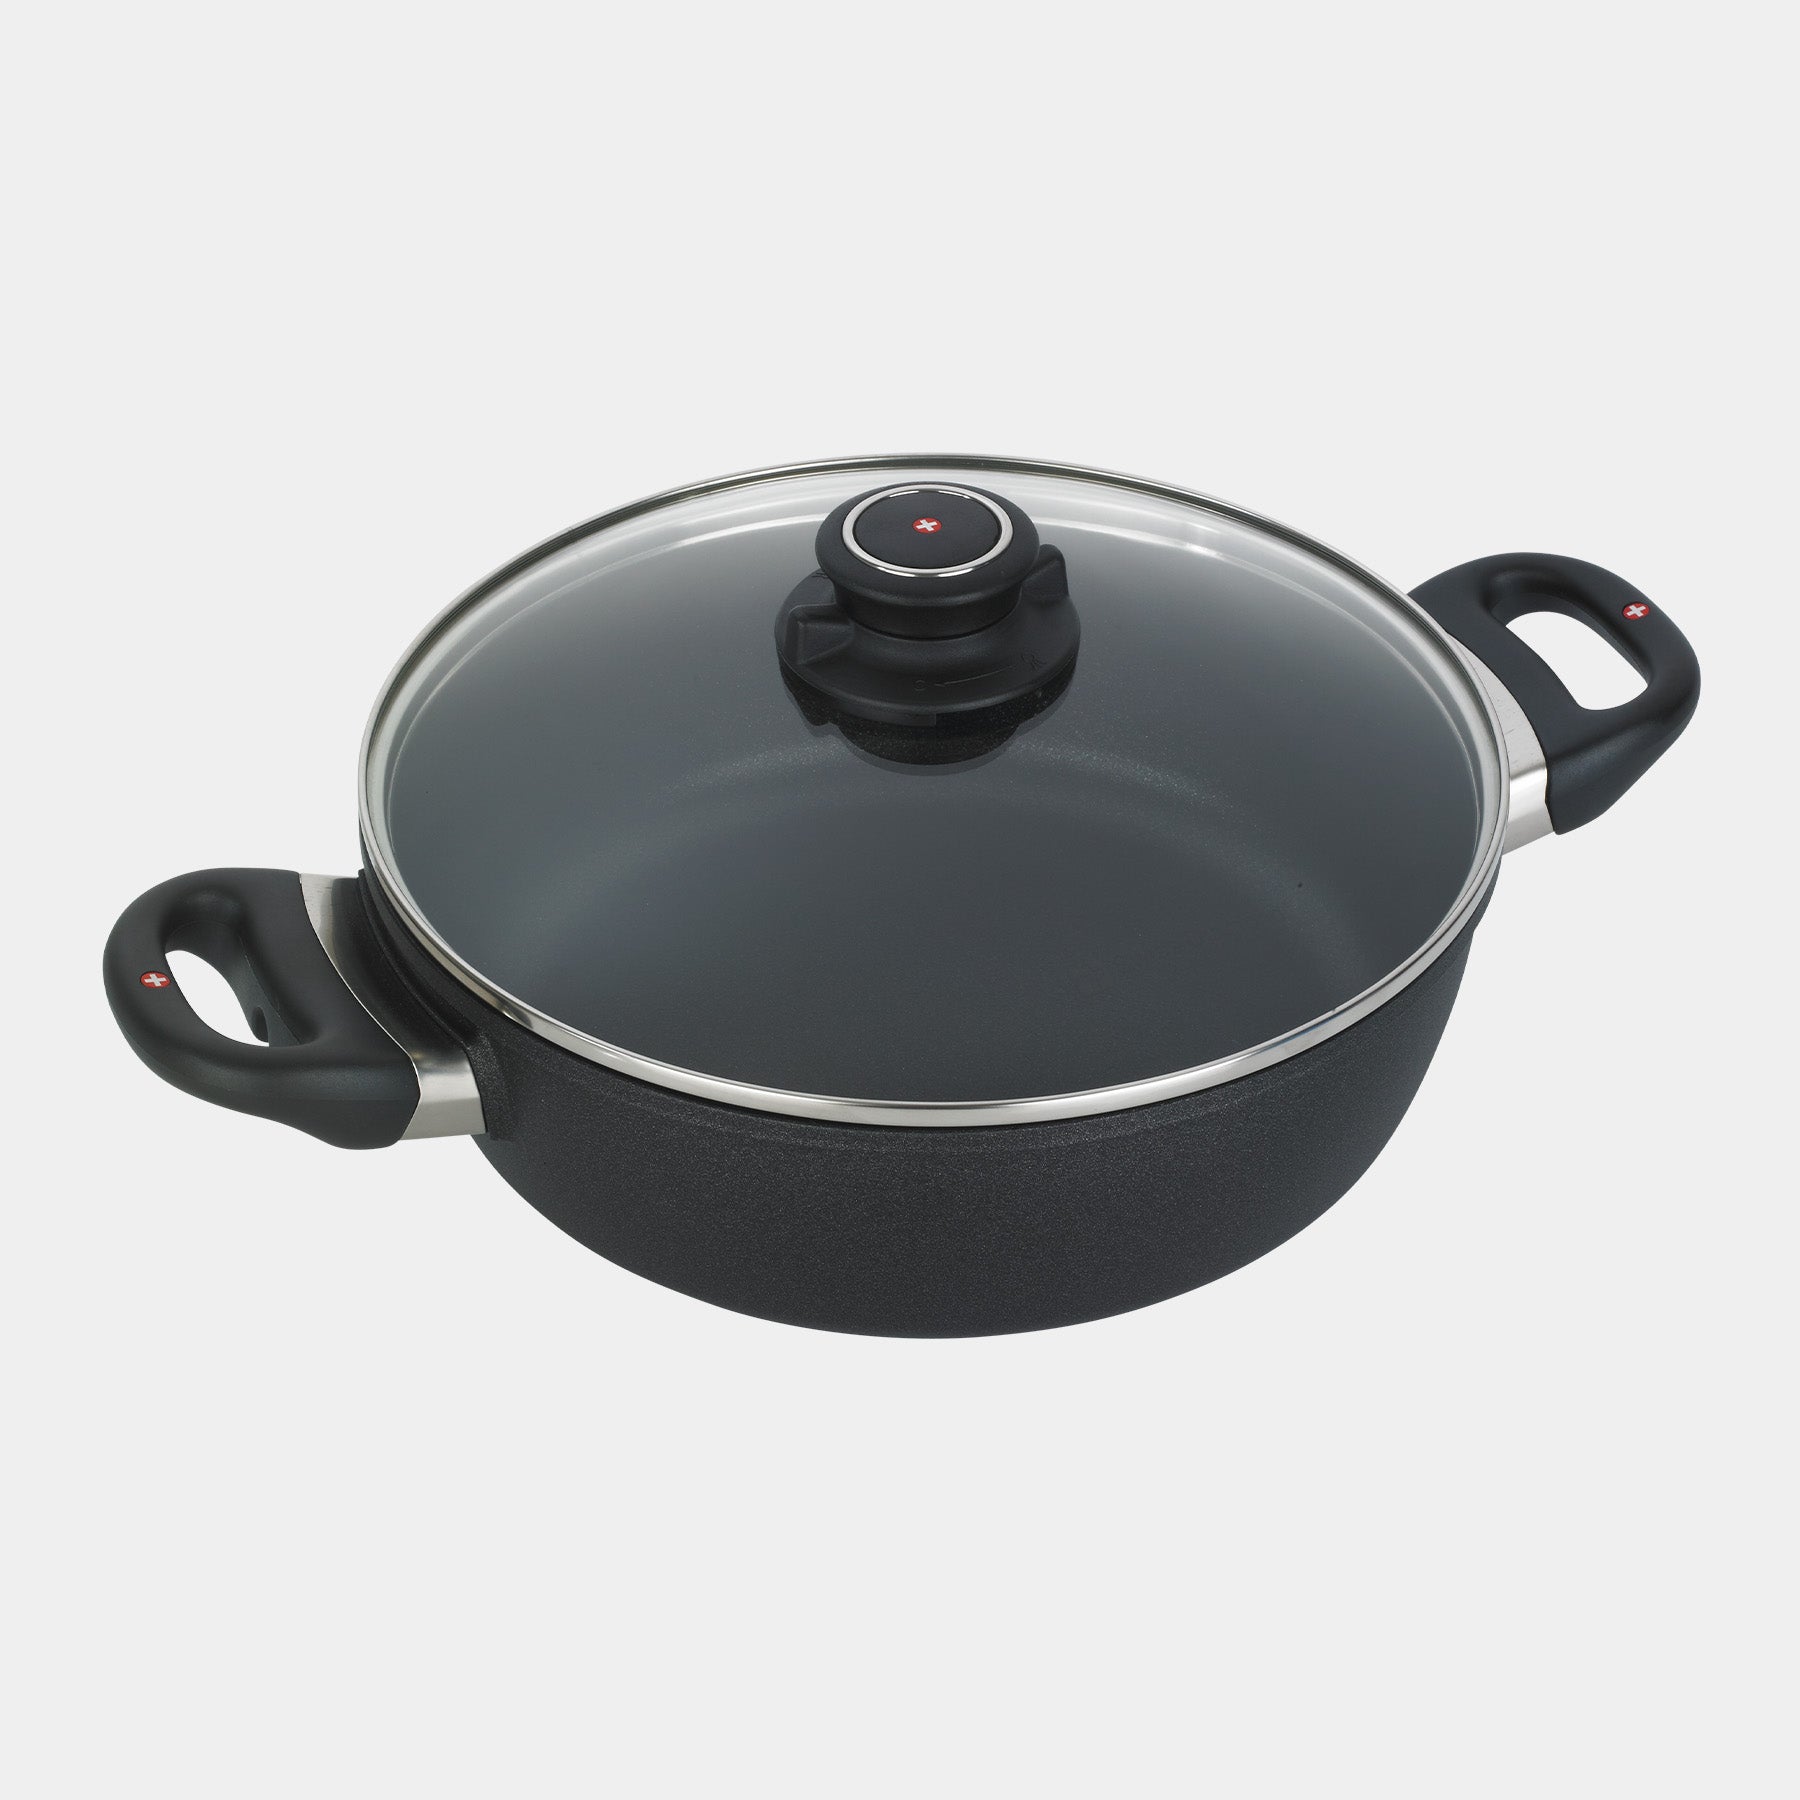 XD Nonstick 3.2 qt Casserole with Glass Lid